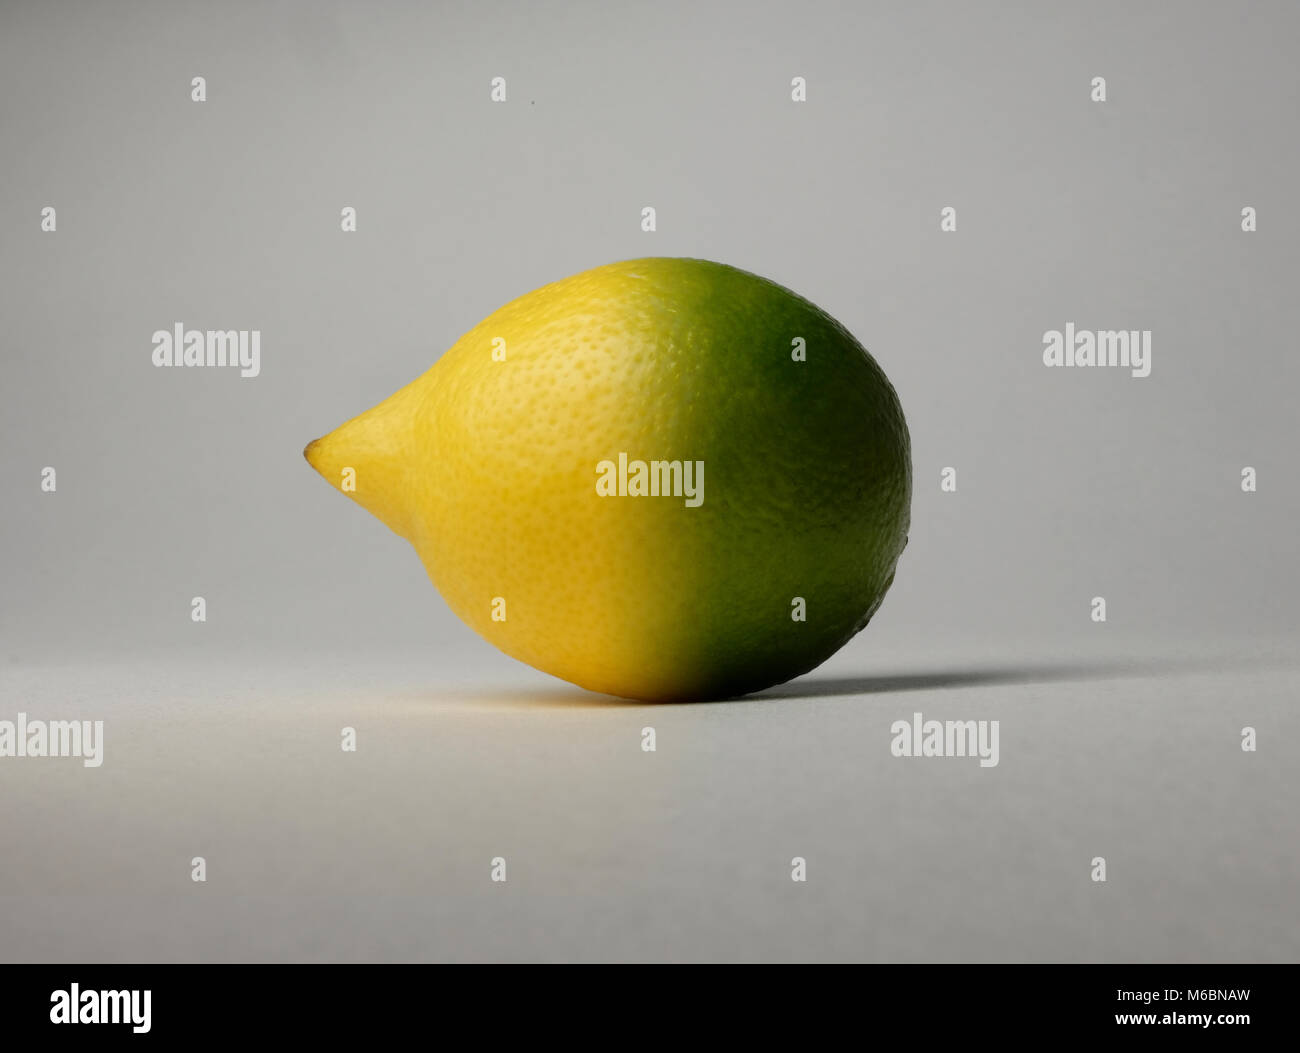 Lemon and lime hybrid photograph, two citrus tangy fruits merged married combined into one superfruit Stock Photo